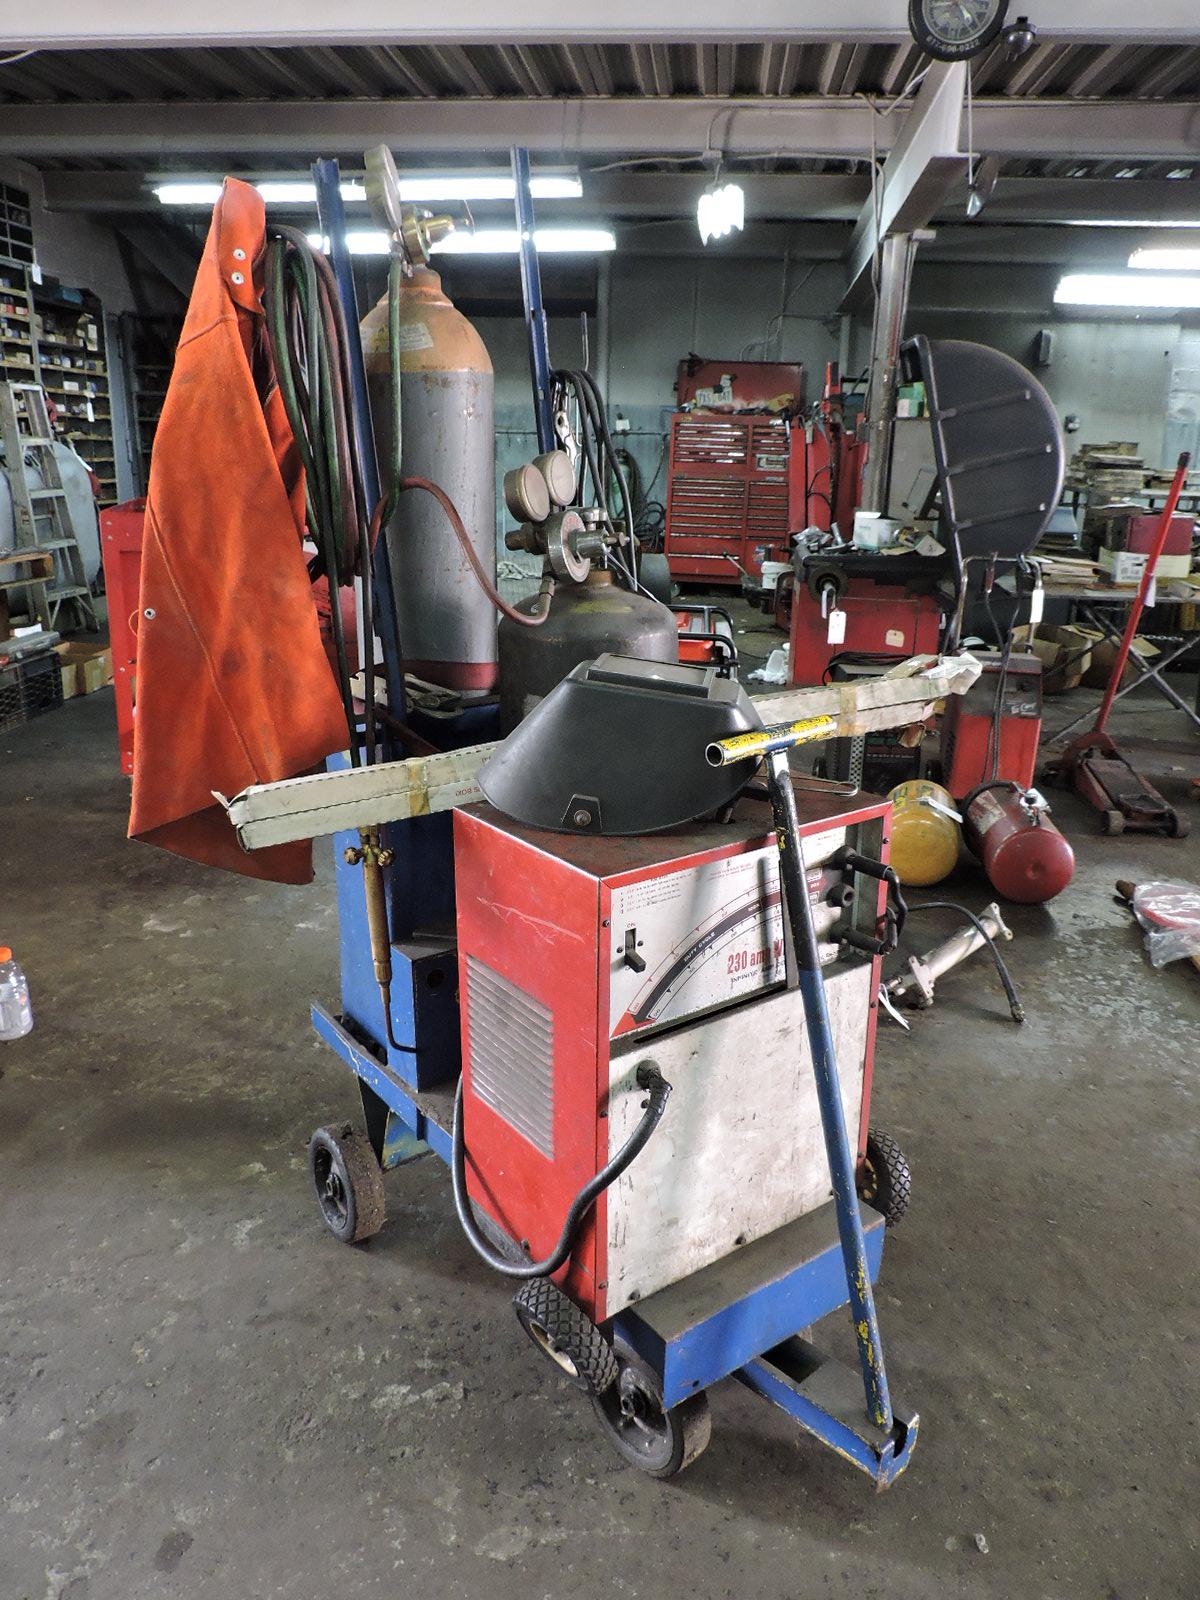 Welding & Cutting Cart - includes: 230 AMP Welder Unit and an Oxygen Acetylene Torch and Accessories